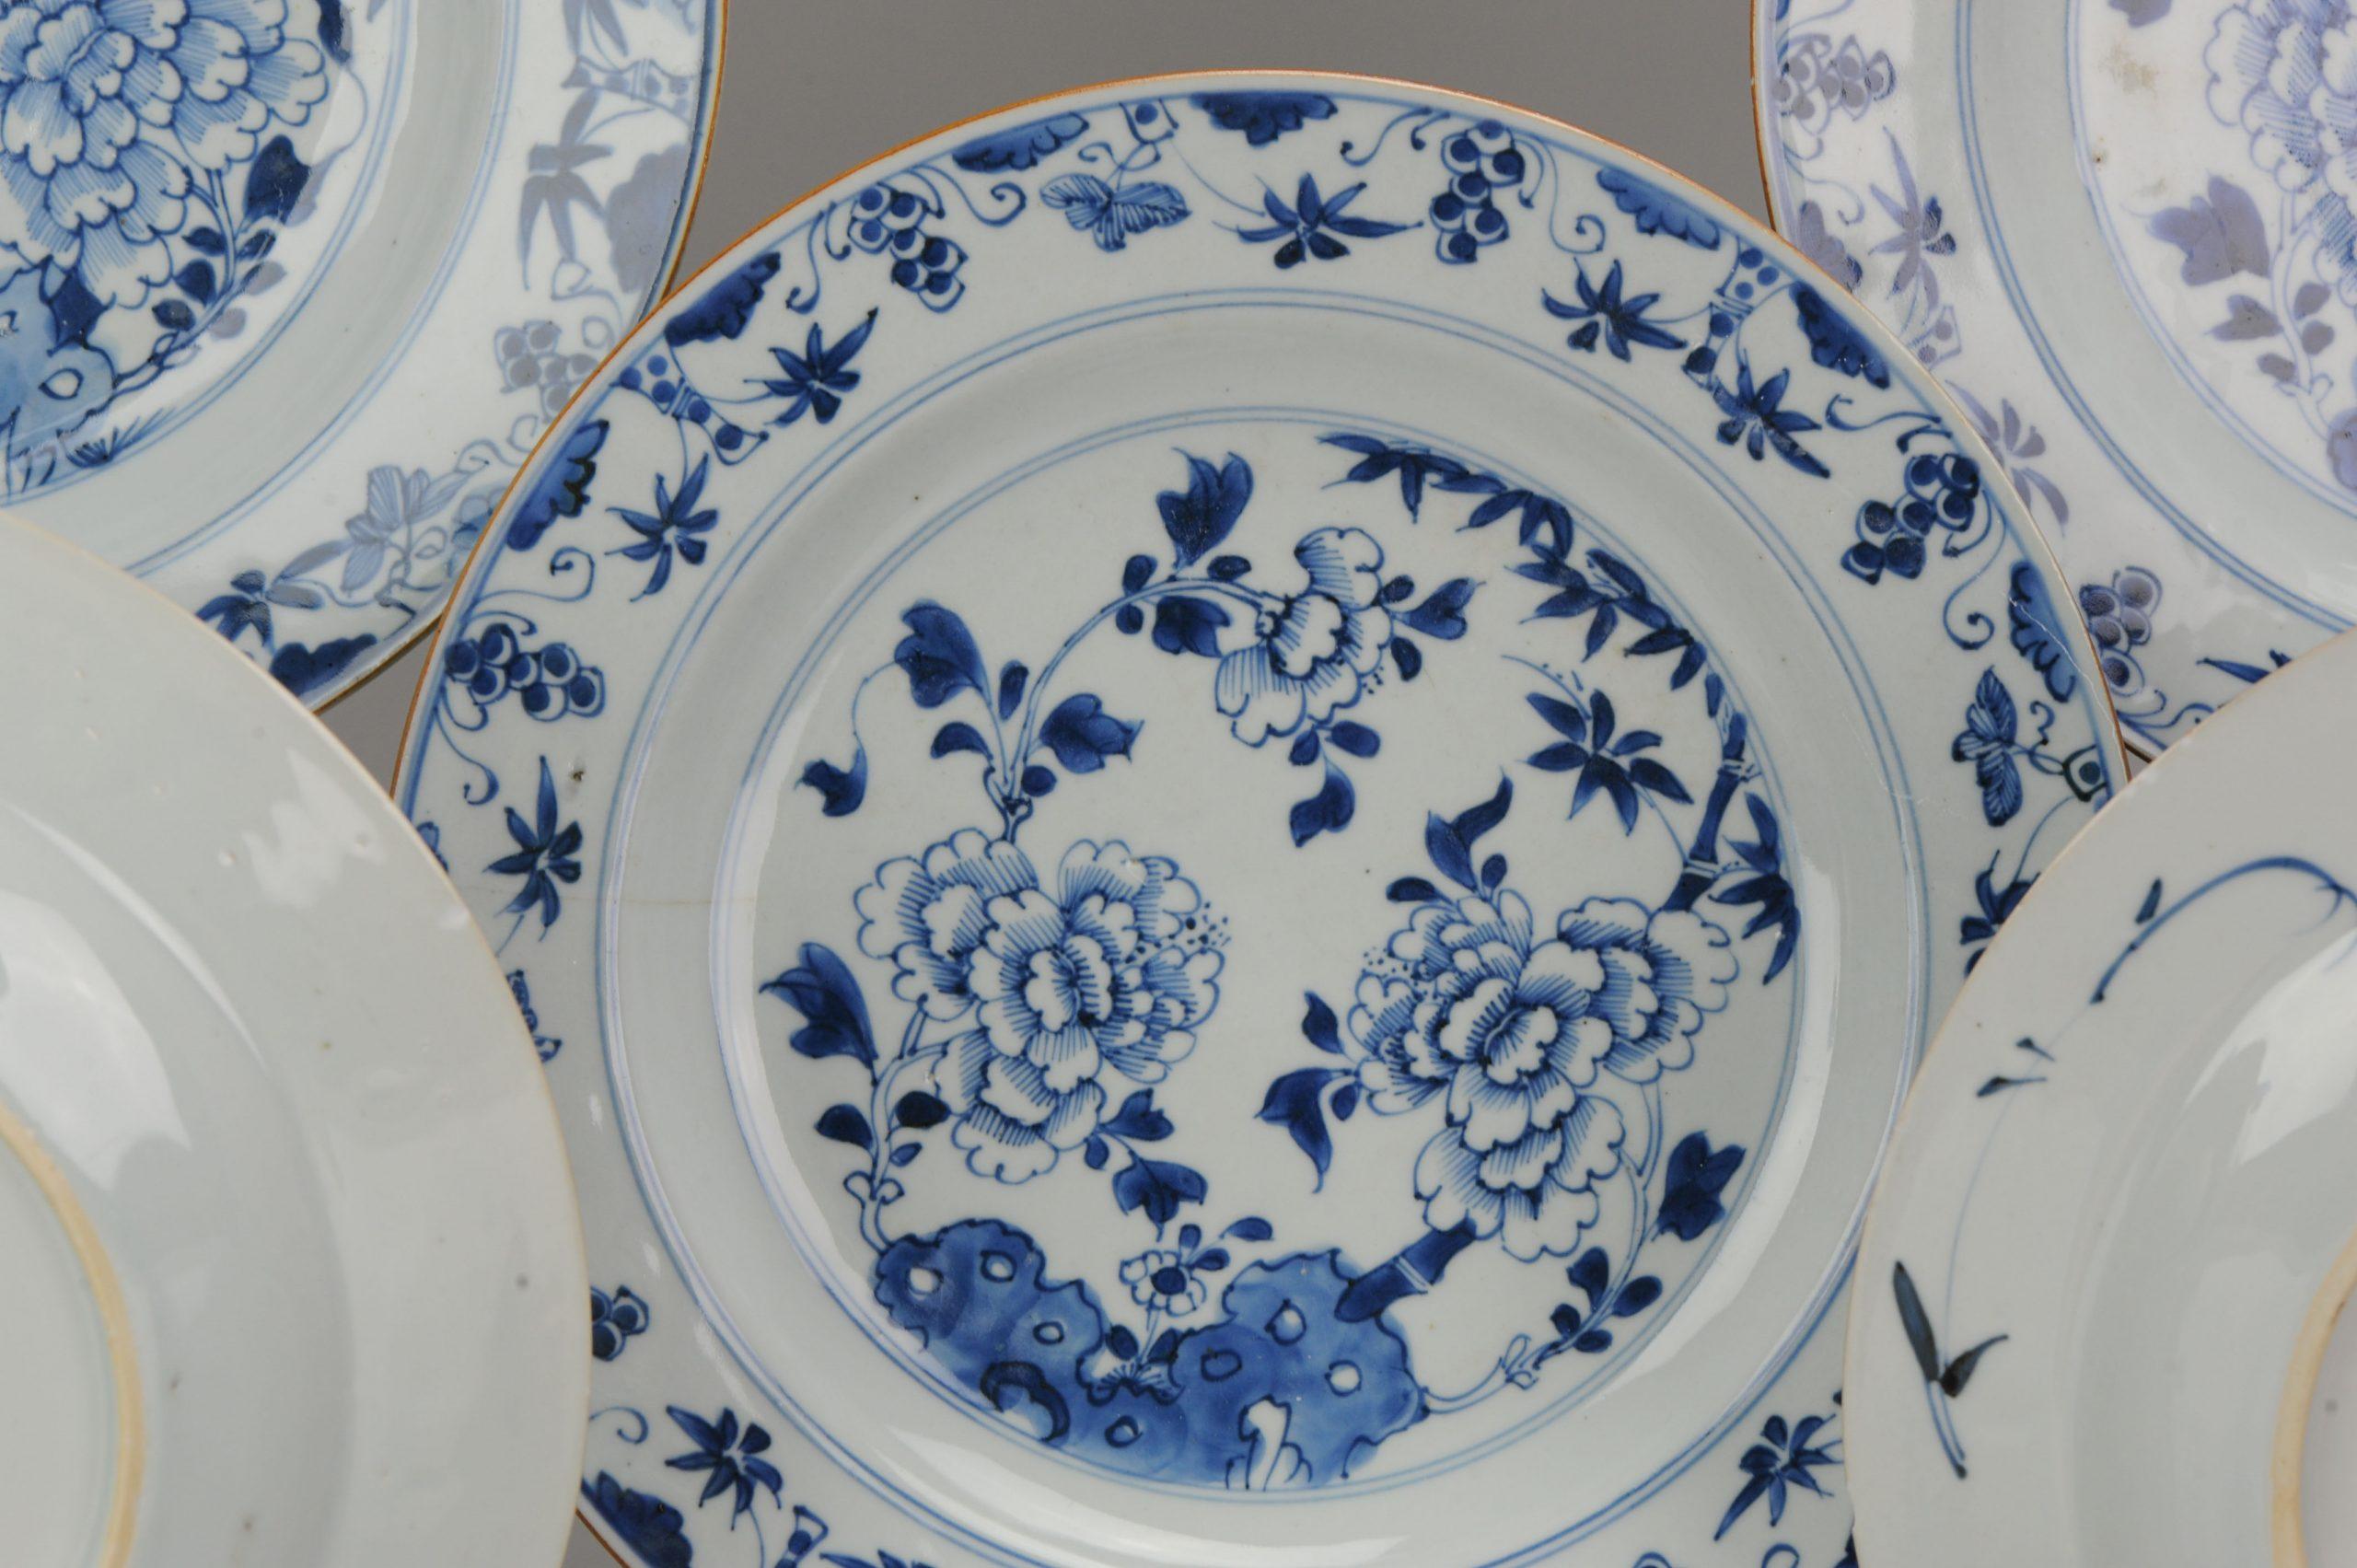 Qing #5 Large Antique Chinese Porcelain Kangxi Period Blue White Dinner Plates